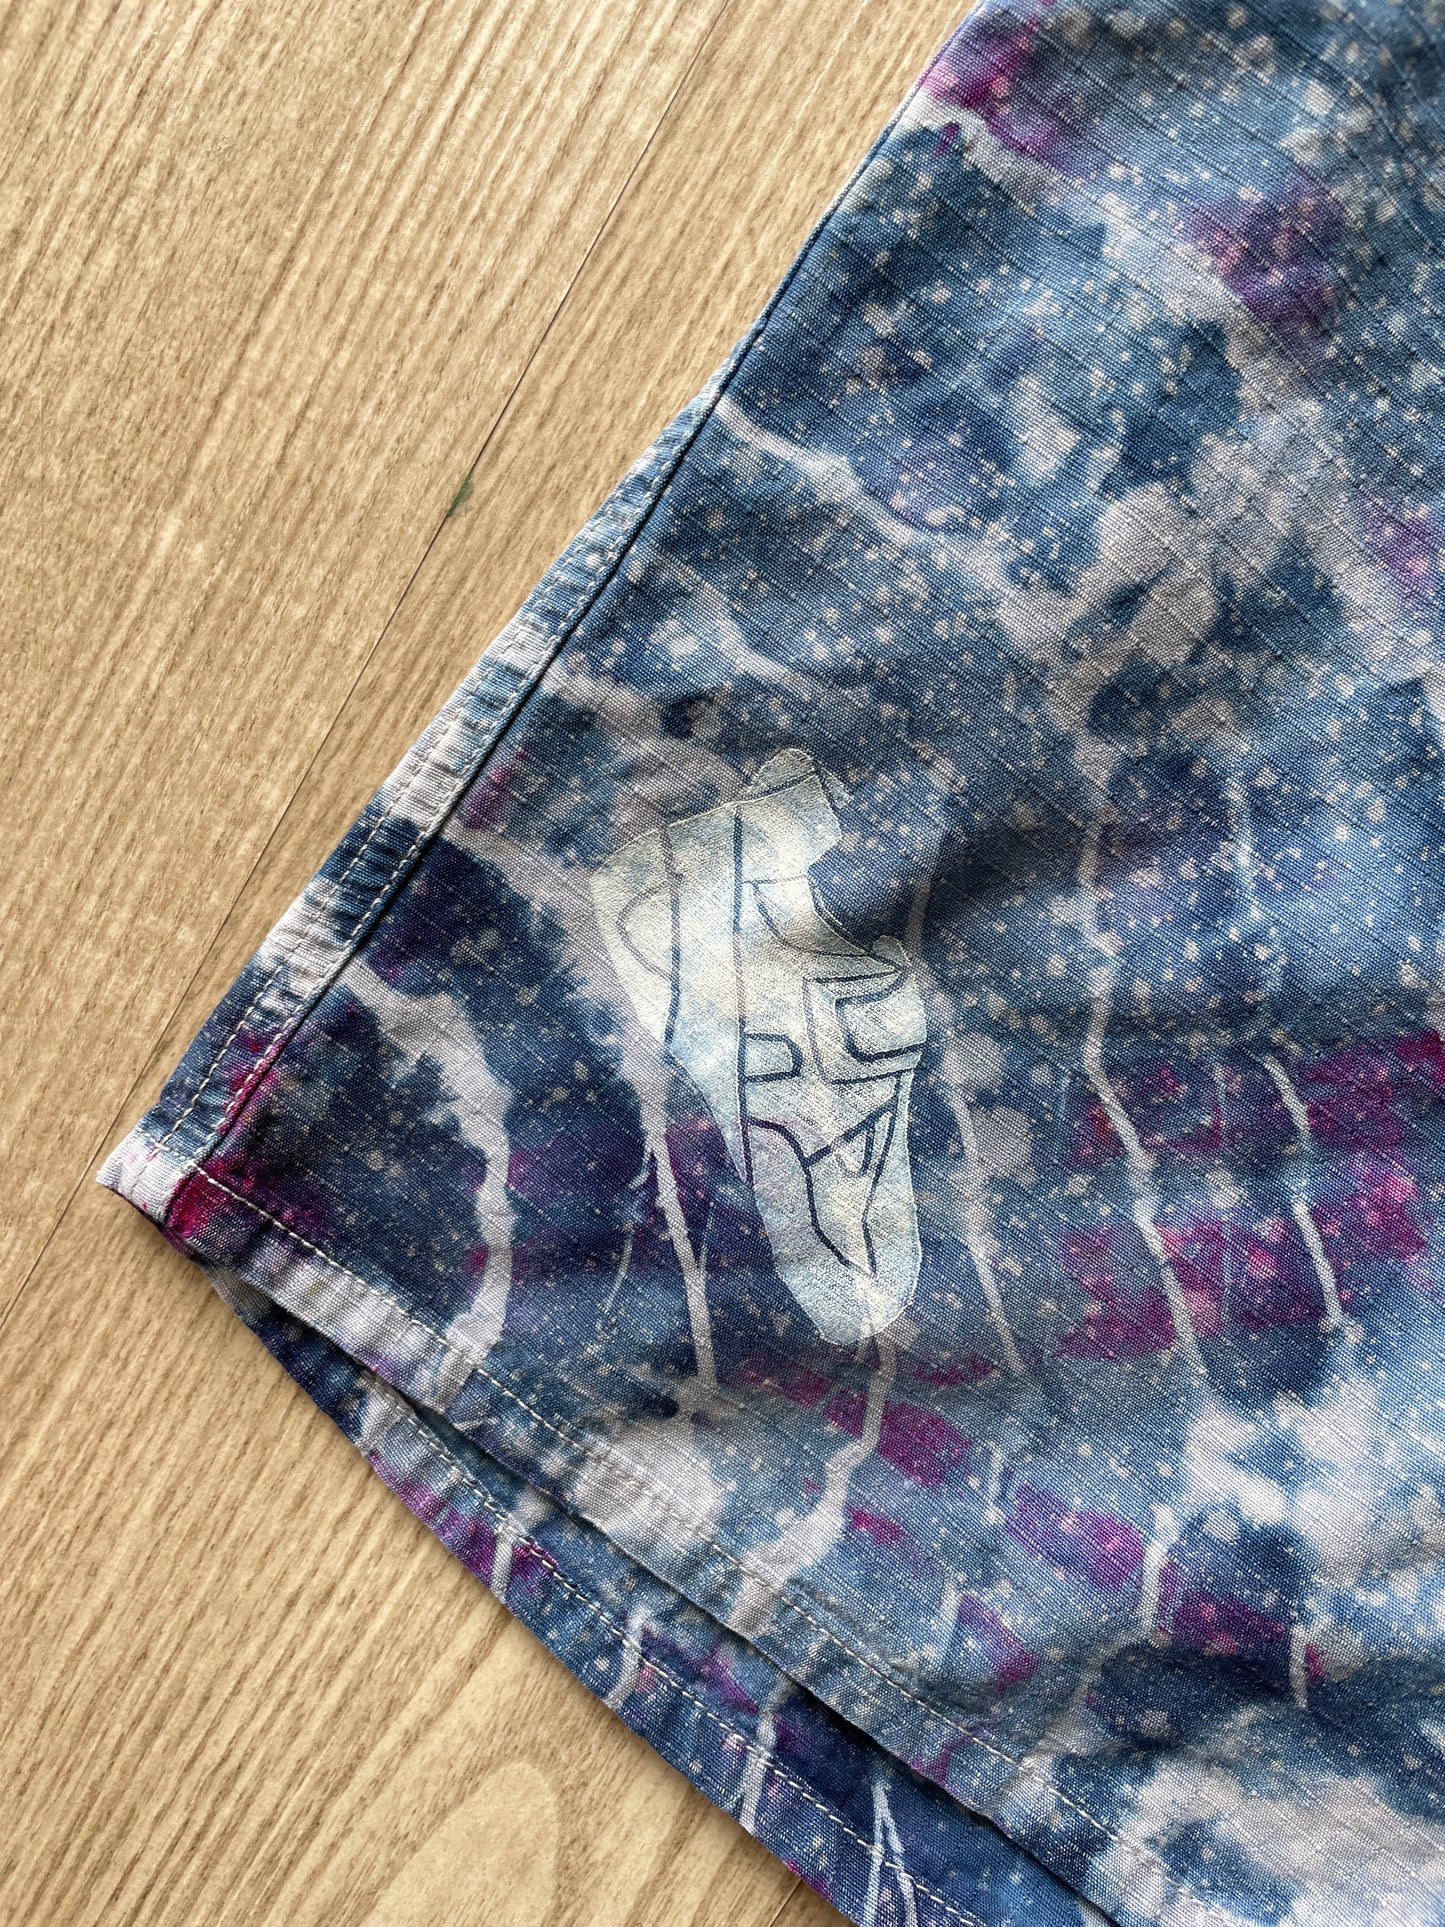 Women's Size 6 Long The North Face Tie Dye Climbing Shorts | One-Of-a-Kind Upcycled Gray and Blue Geode Shorts